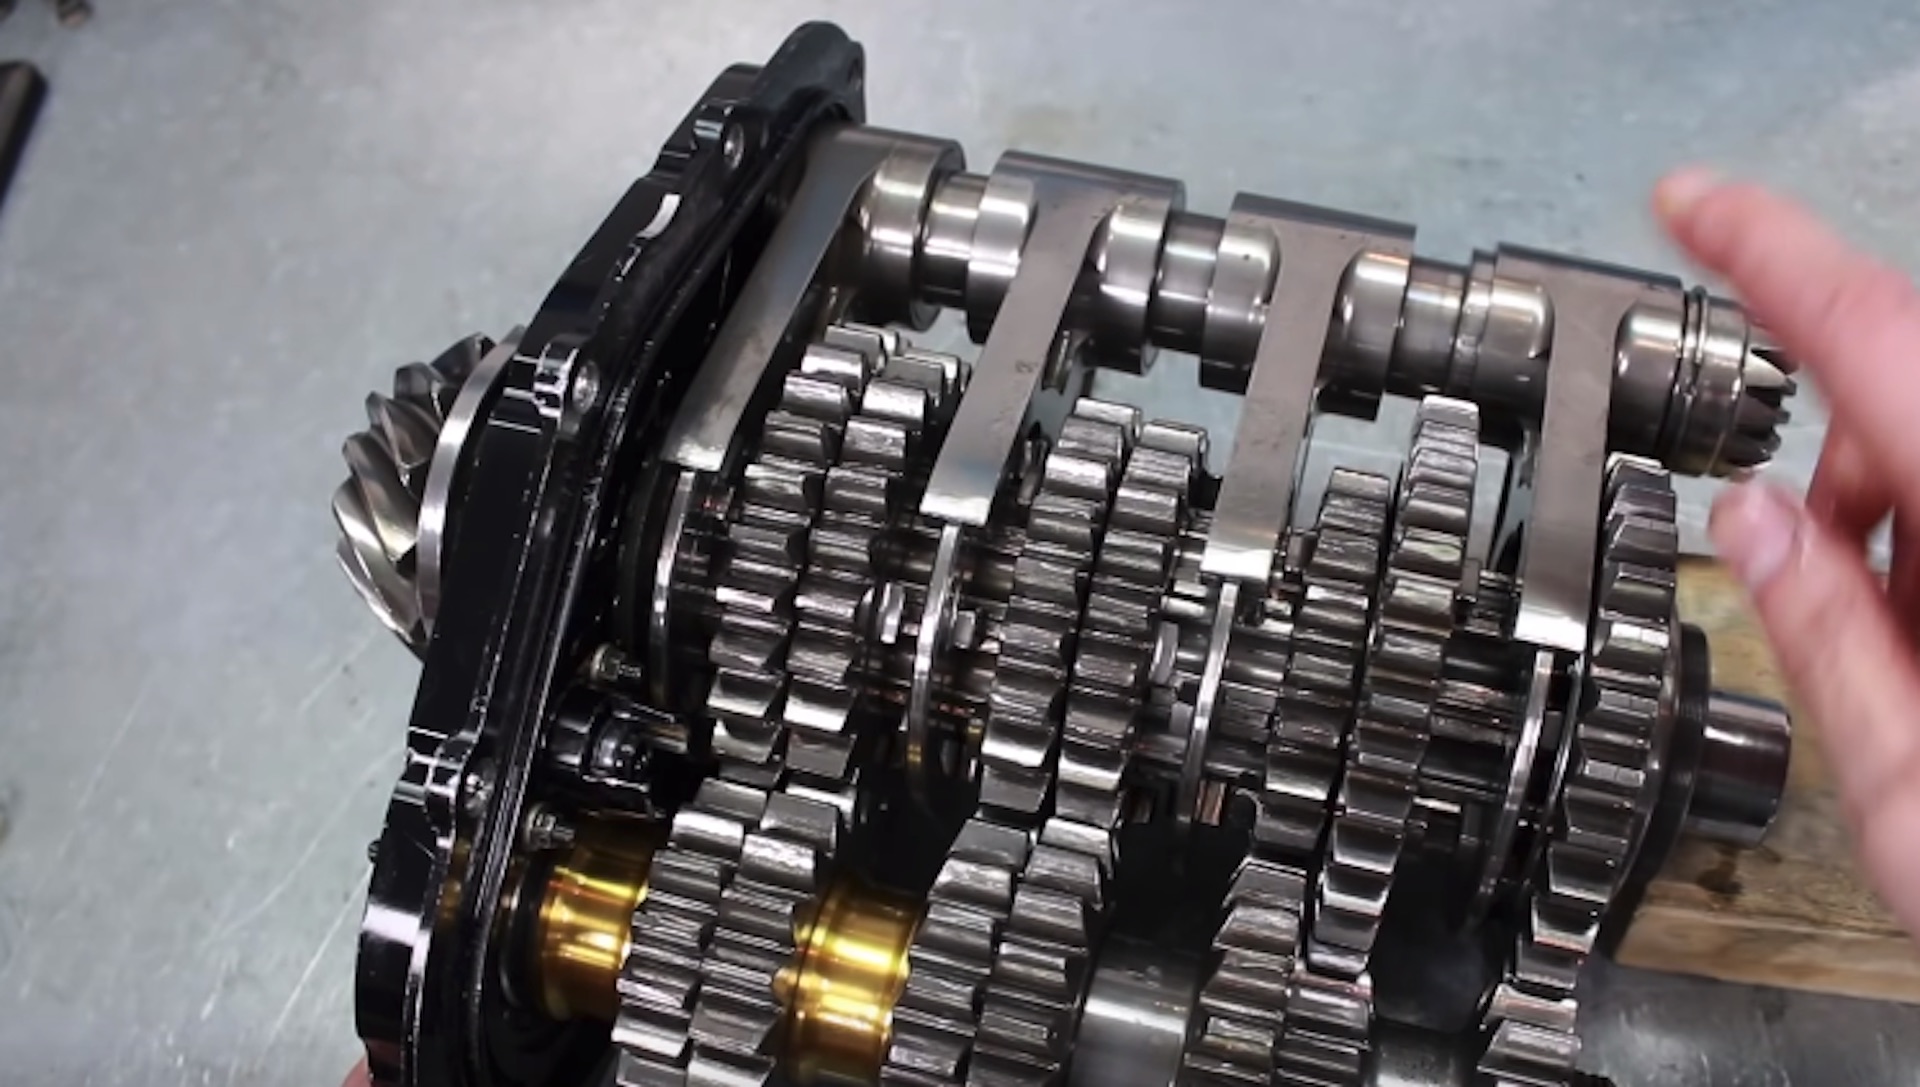 Find out how an F1 car's gearbox works